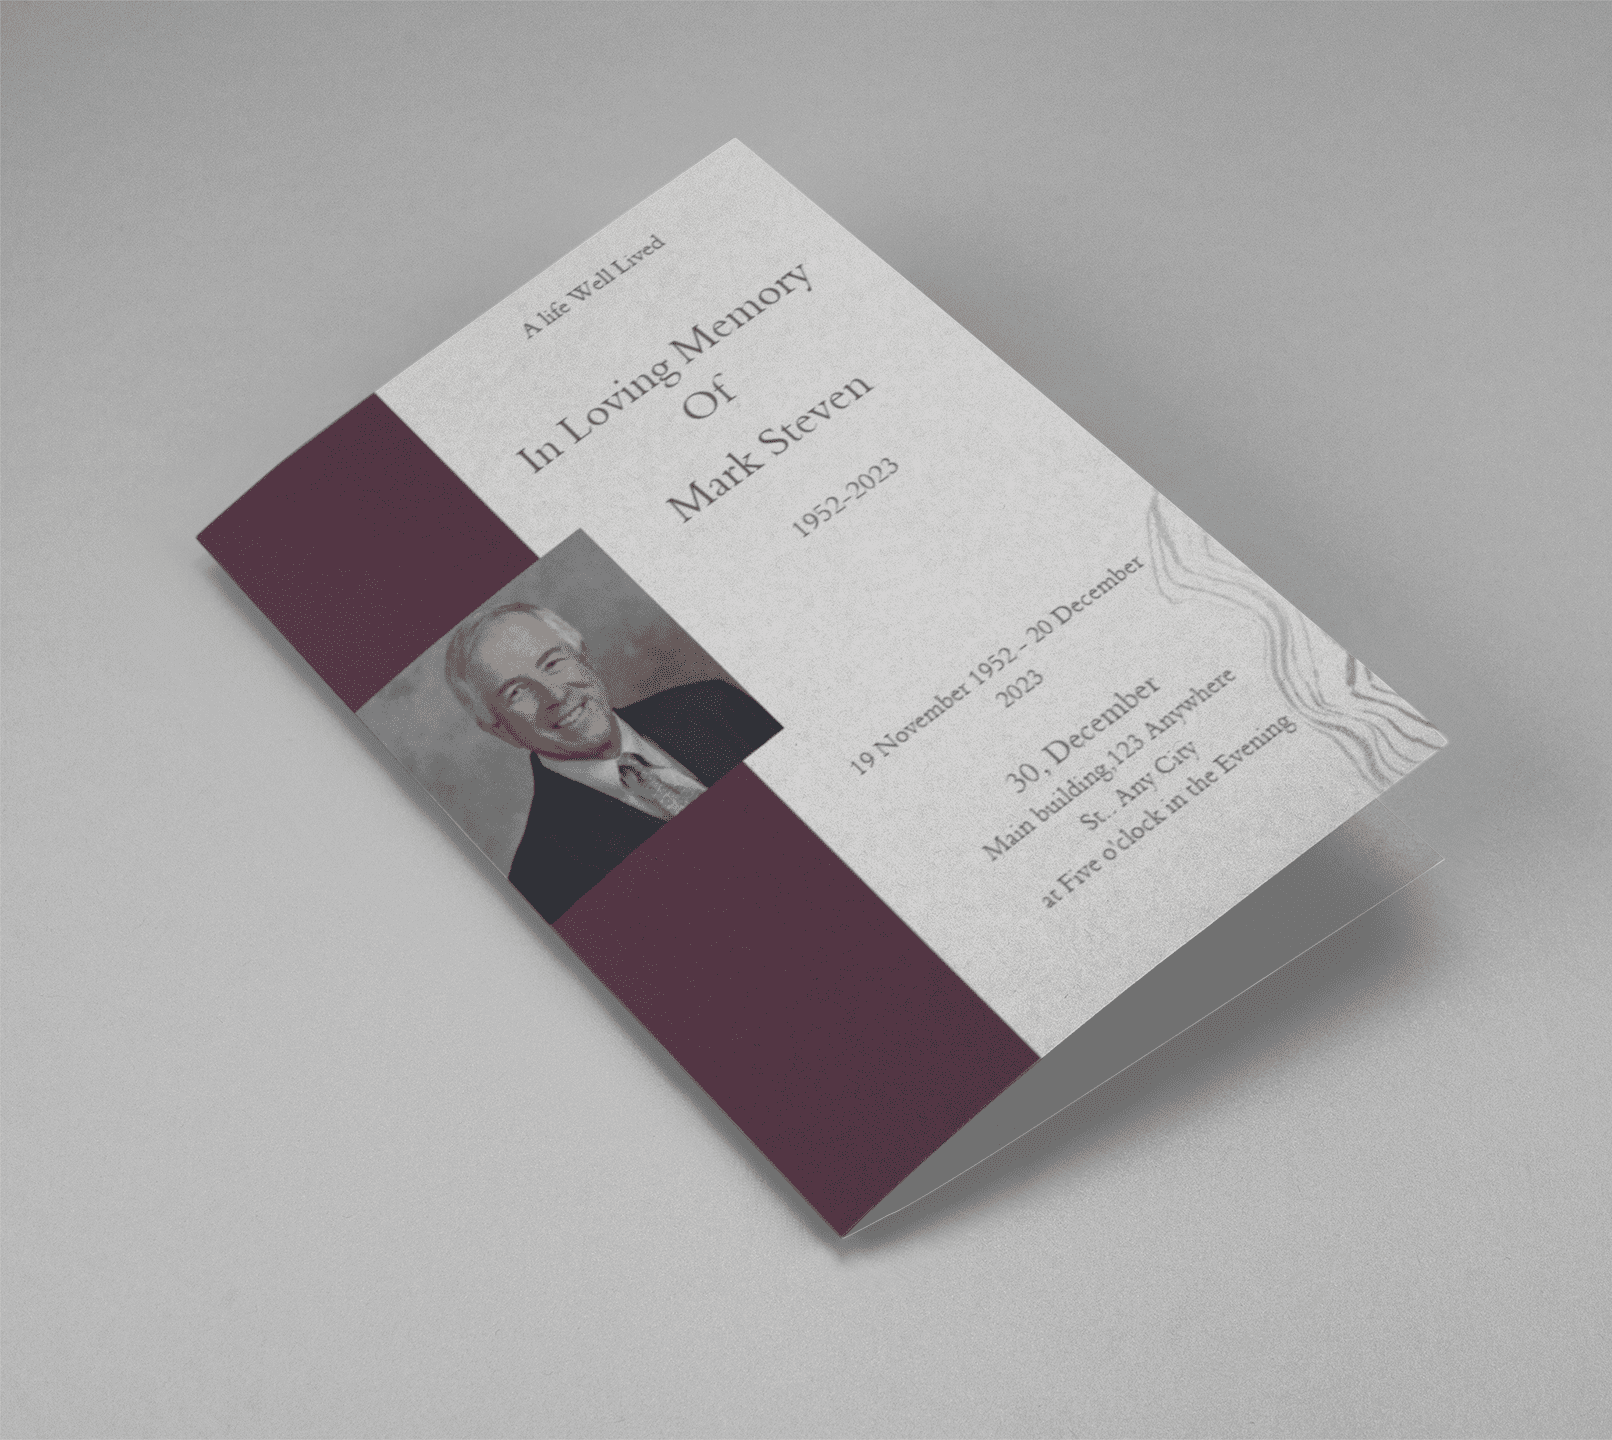 Grey and Burgundy Elegant Half Page Funeral Program Template cover